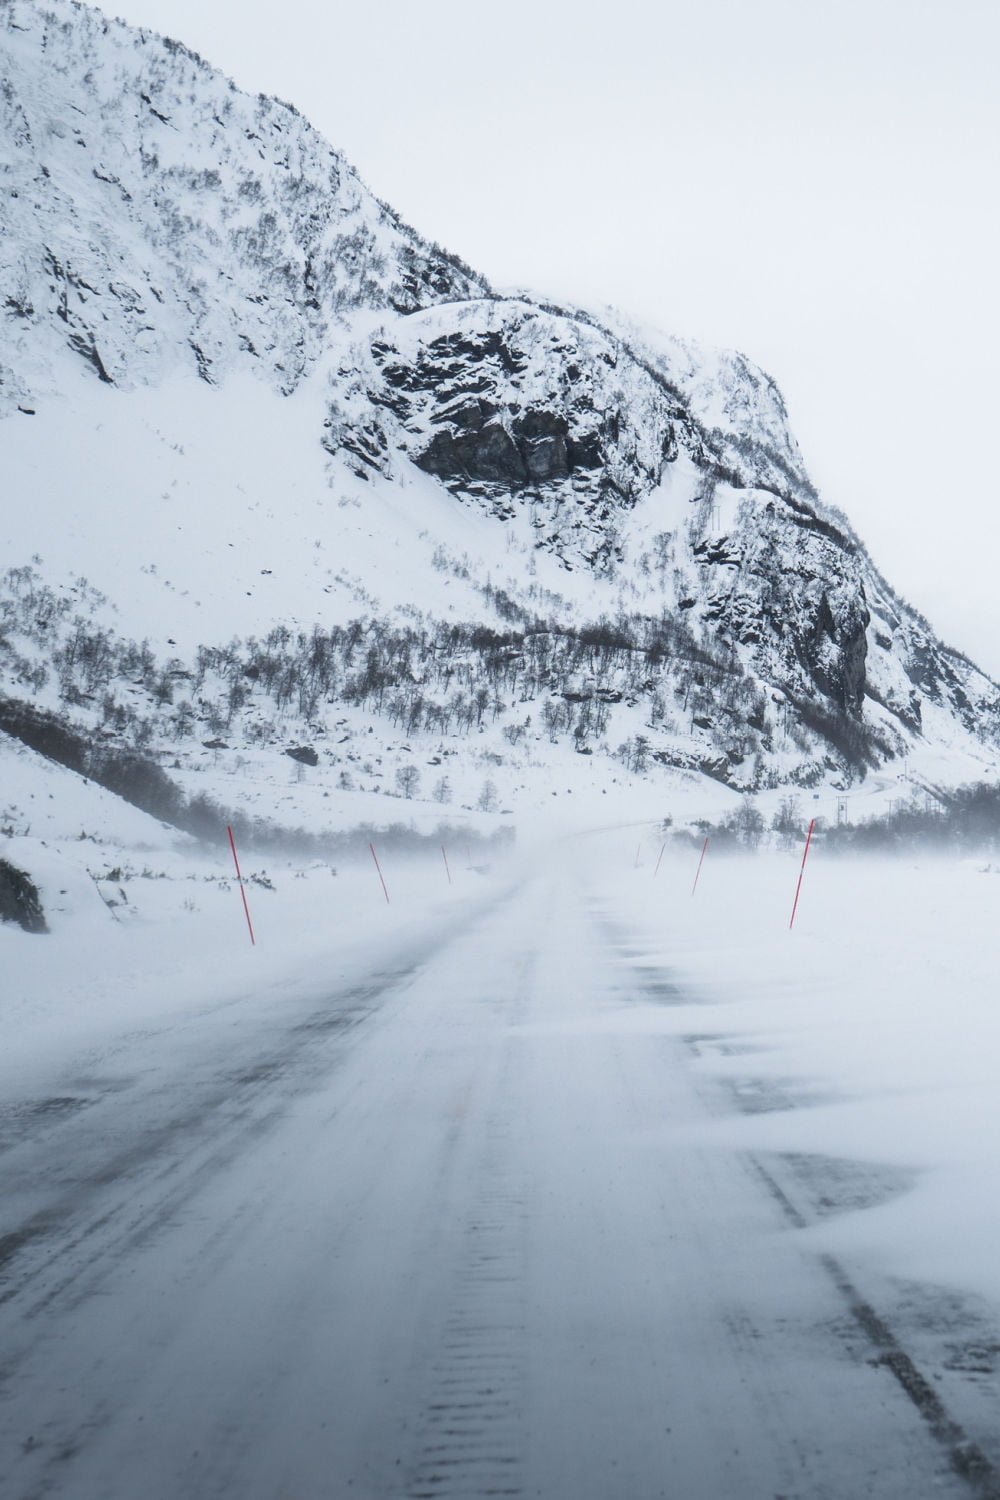 Winter drive to the Geirangerfjord.